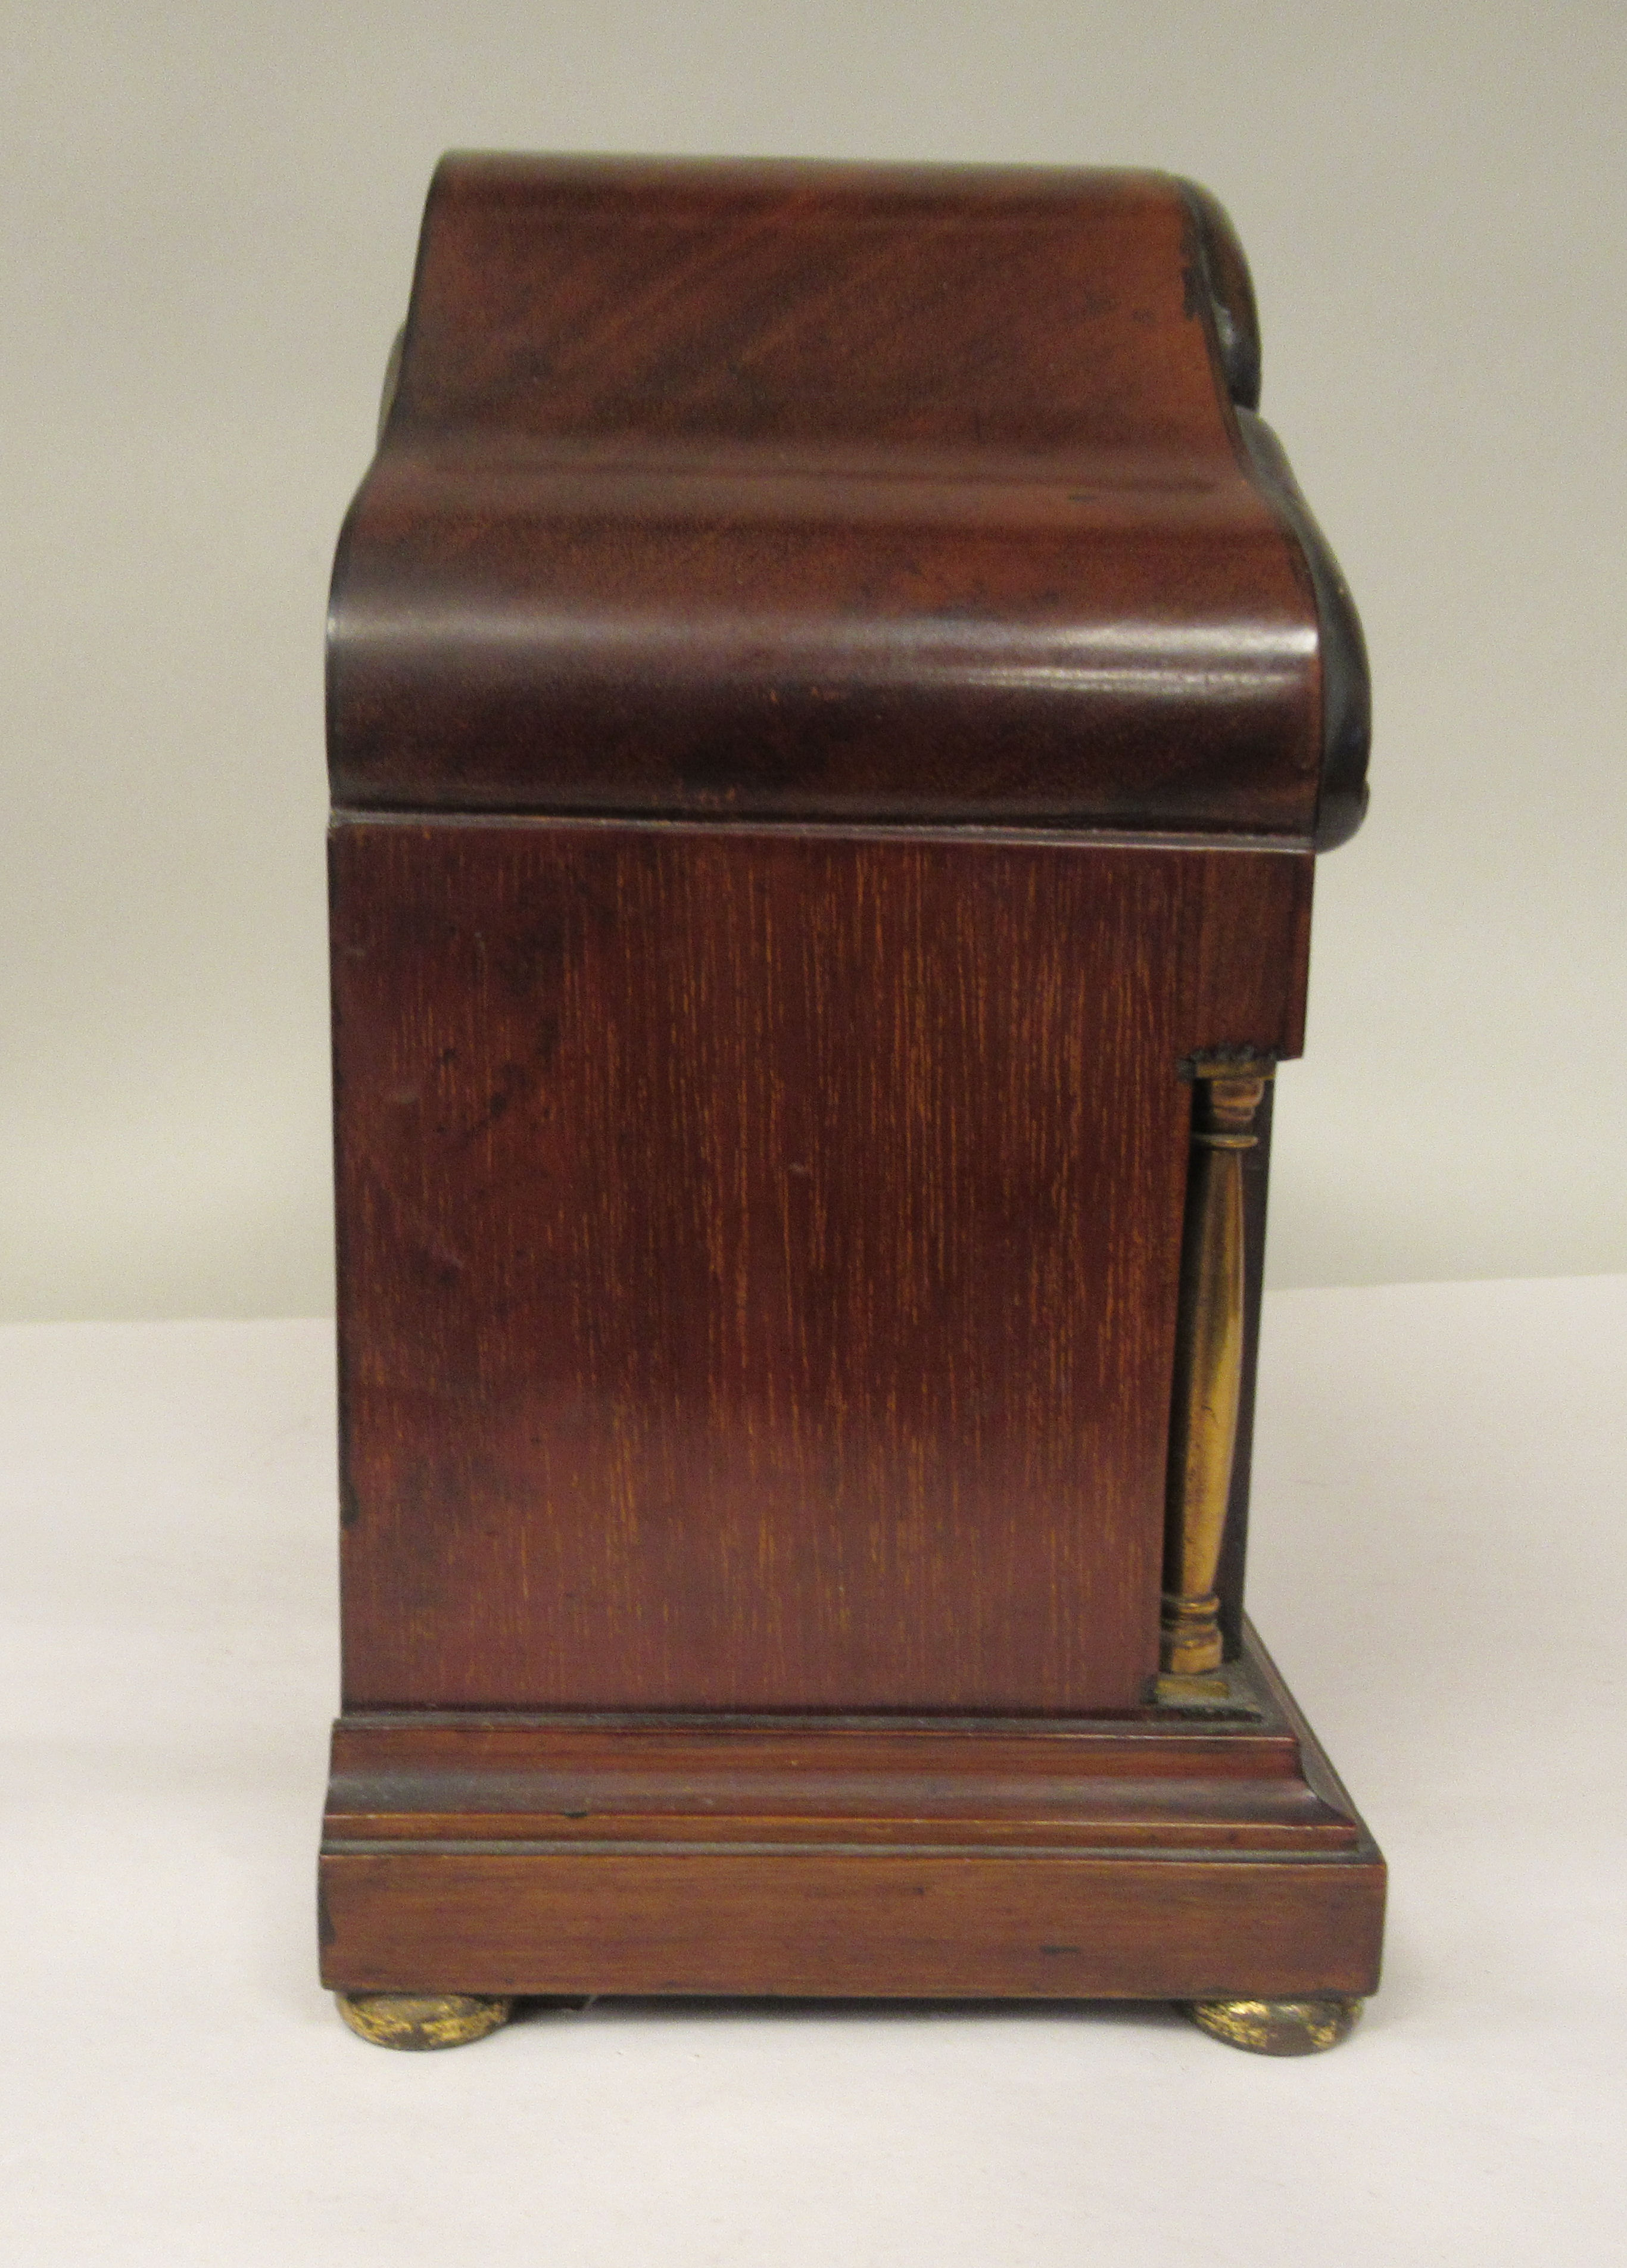 An Edwardian carved, string inlaid mahogany and marquetry cased mantel clock with a round arch top - Image 2 of 7